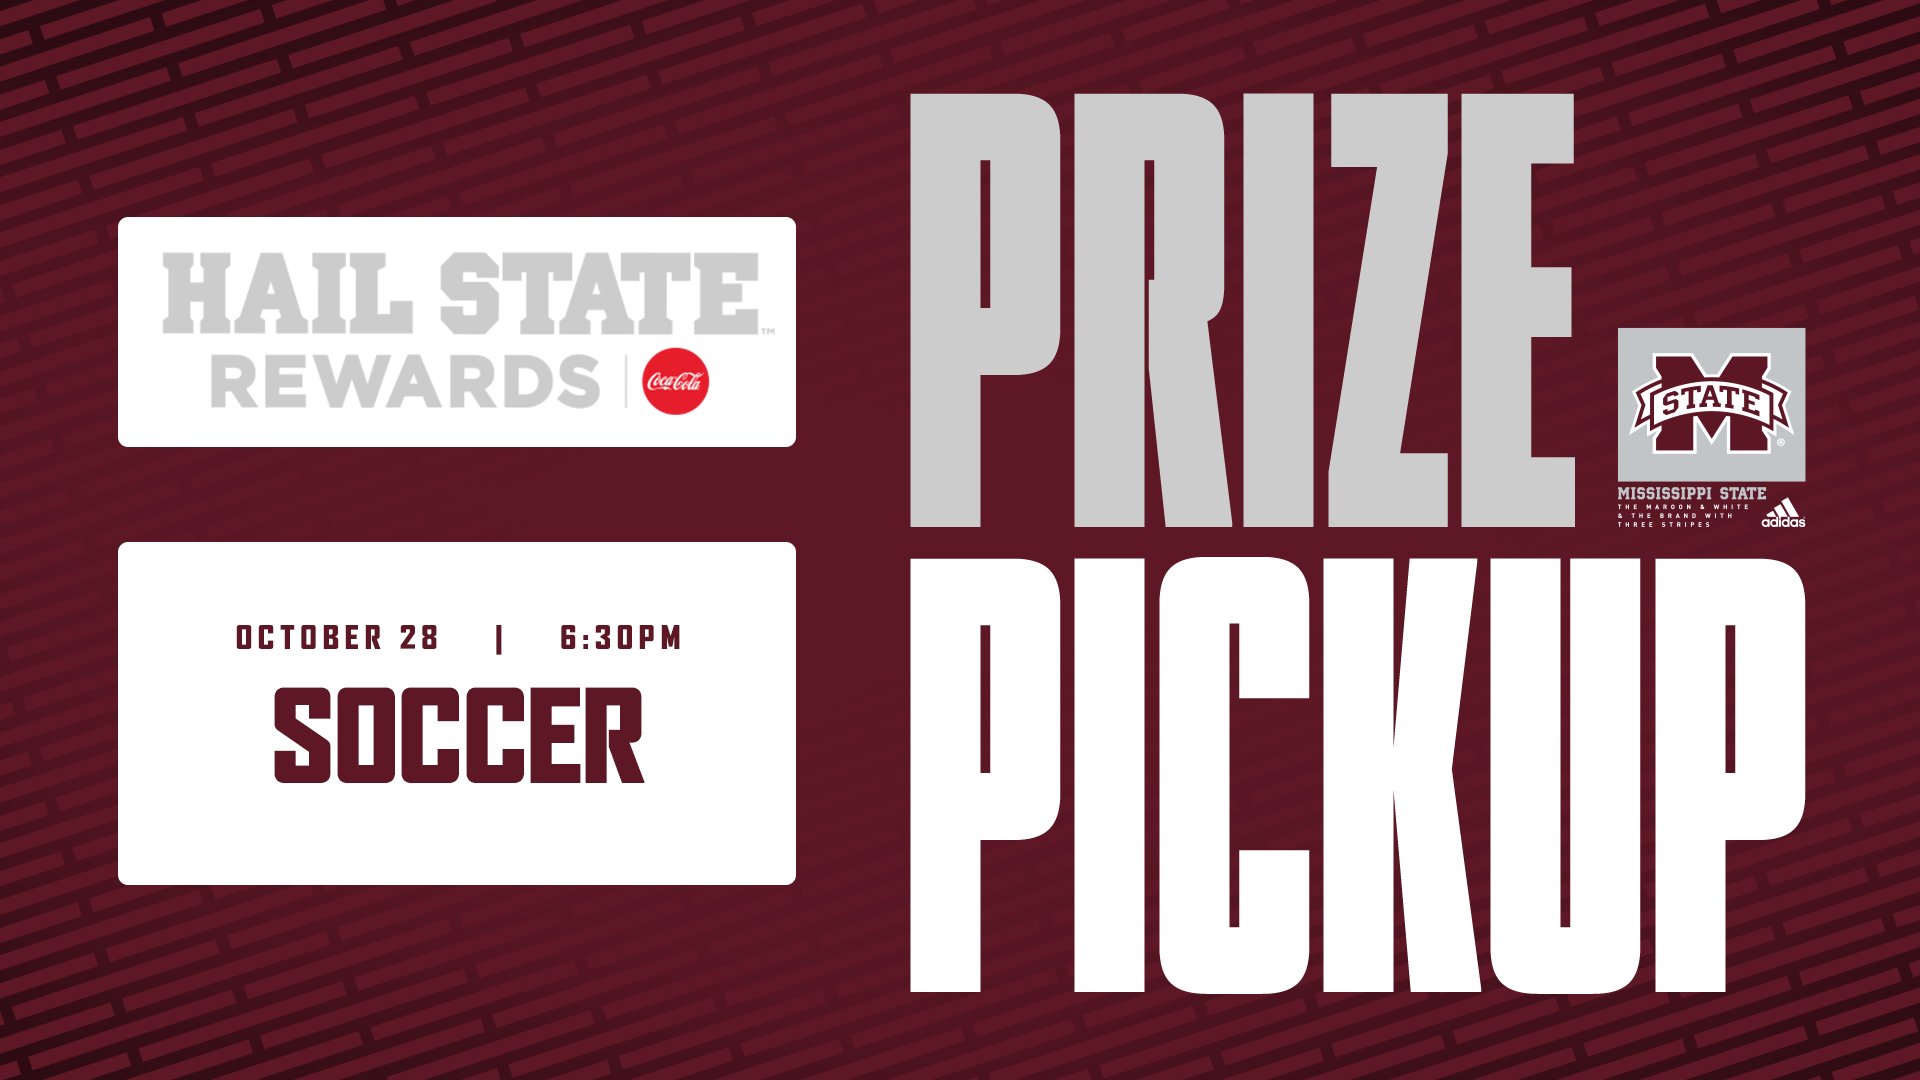 Maroon, white and gray graphic reminding students about Hail State Rewards prize pickup at MSU's soccer game versus Ole Miss